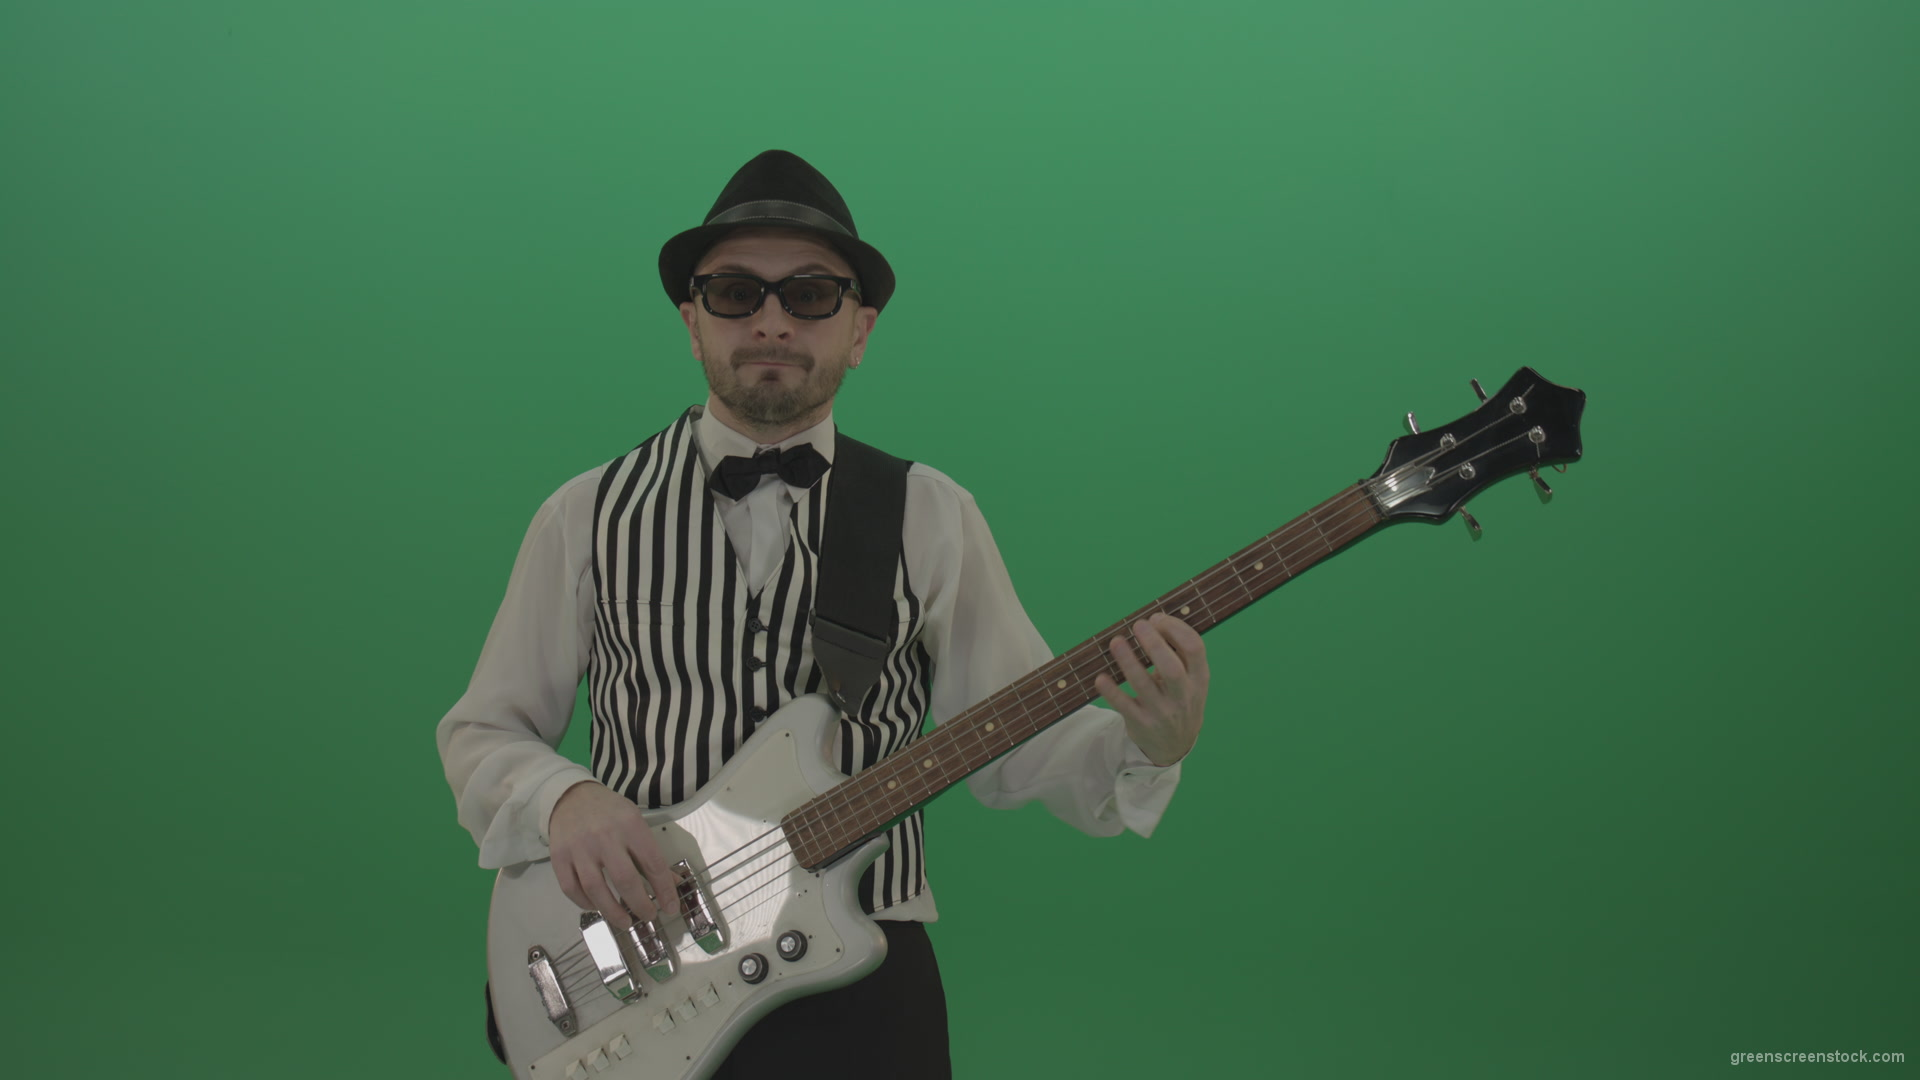 Guitar-player-browses-the-bass-guitar-playing-solo-and-charismatically-shows-facial-expressions_006 Green Screen Stock